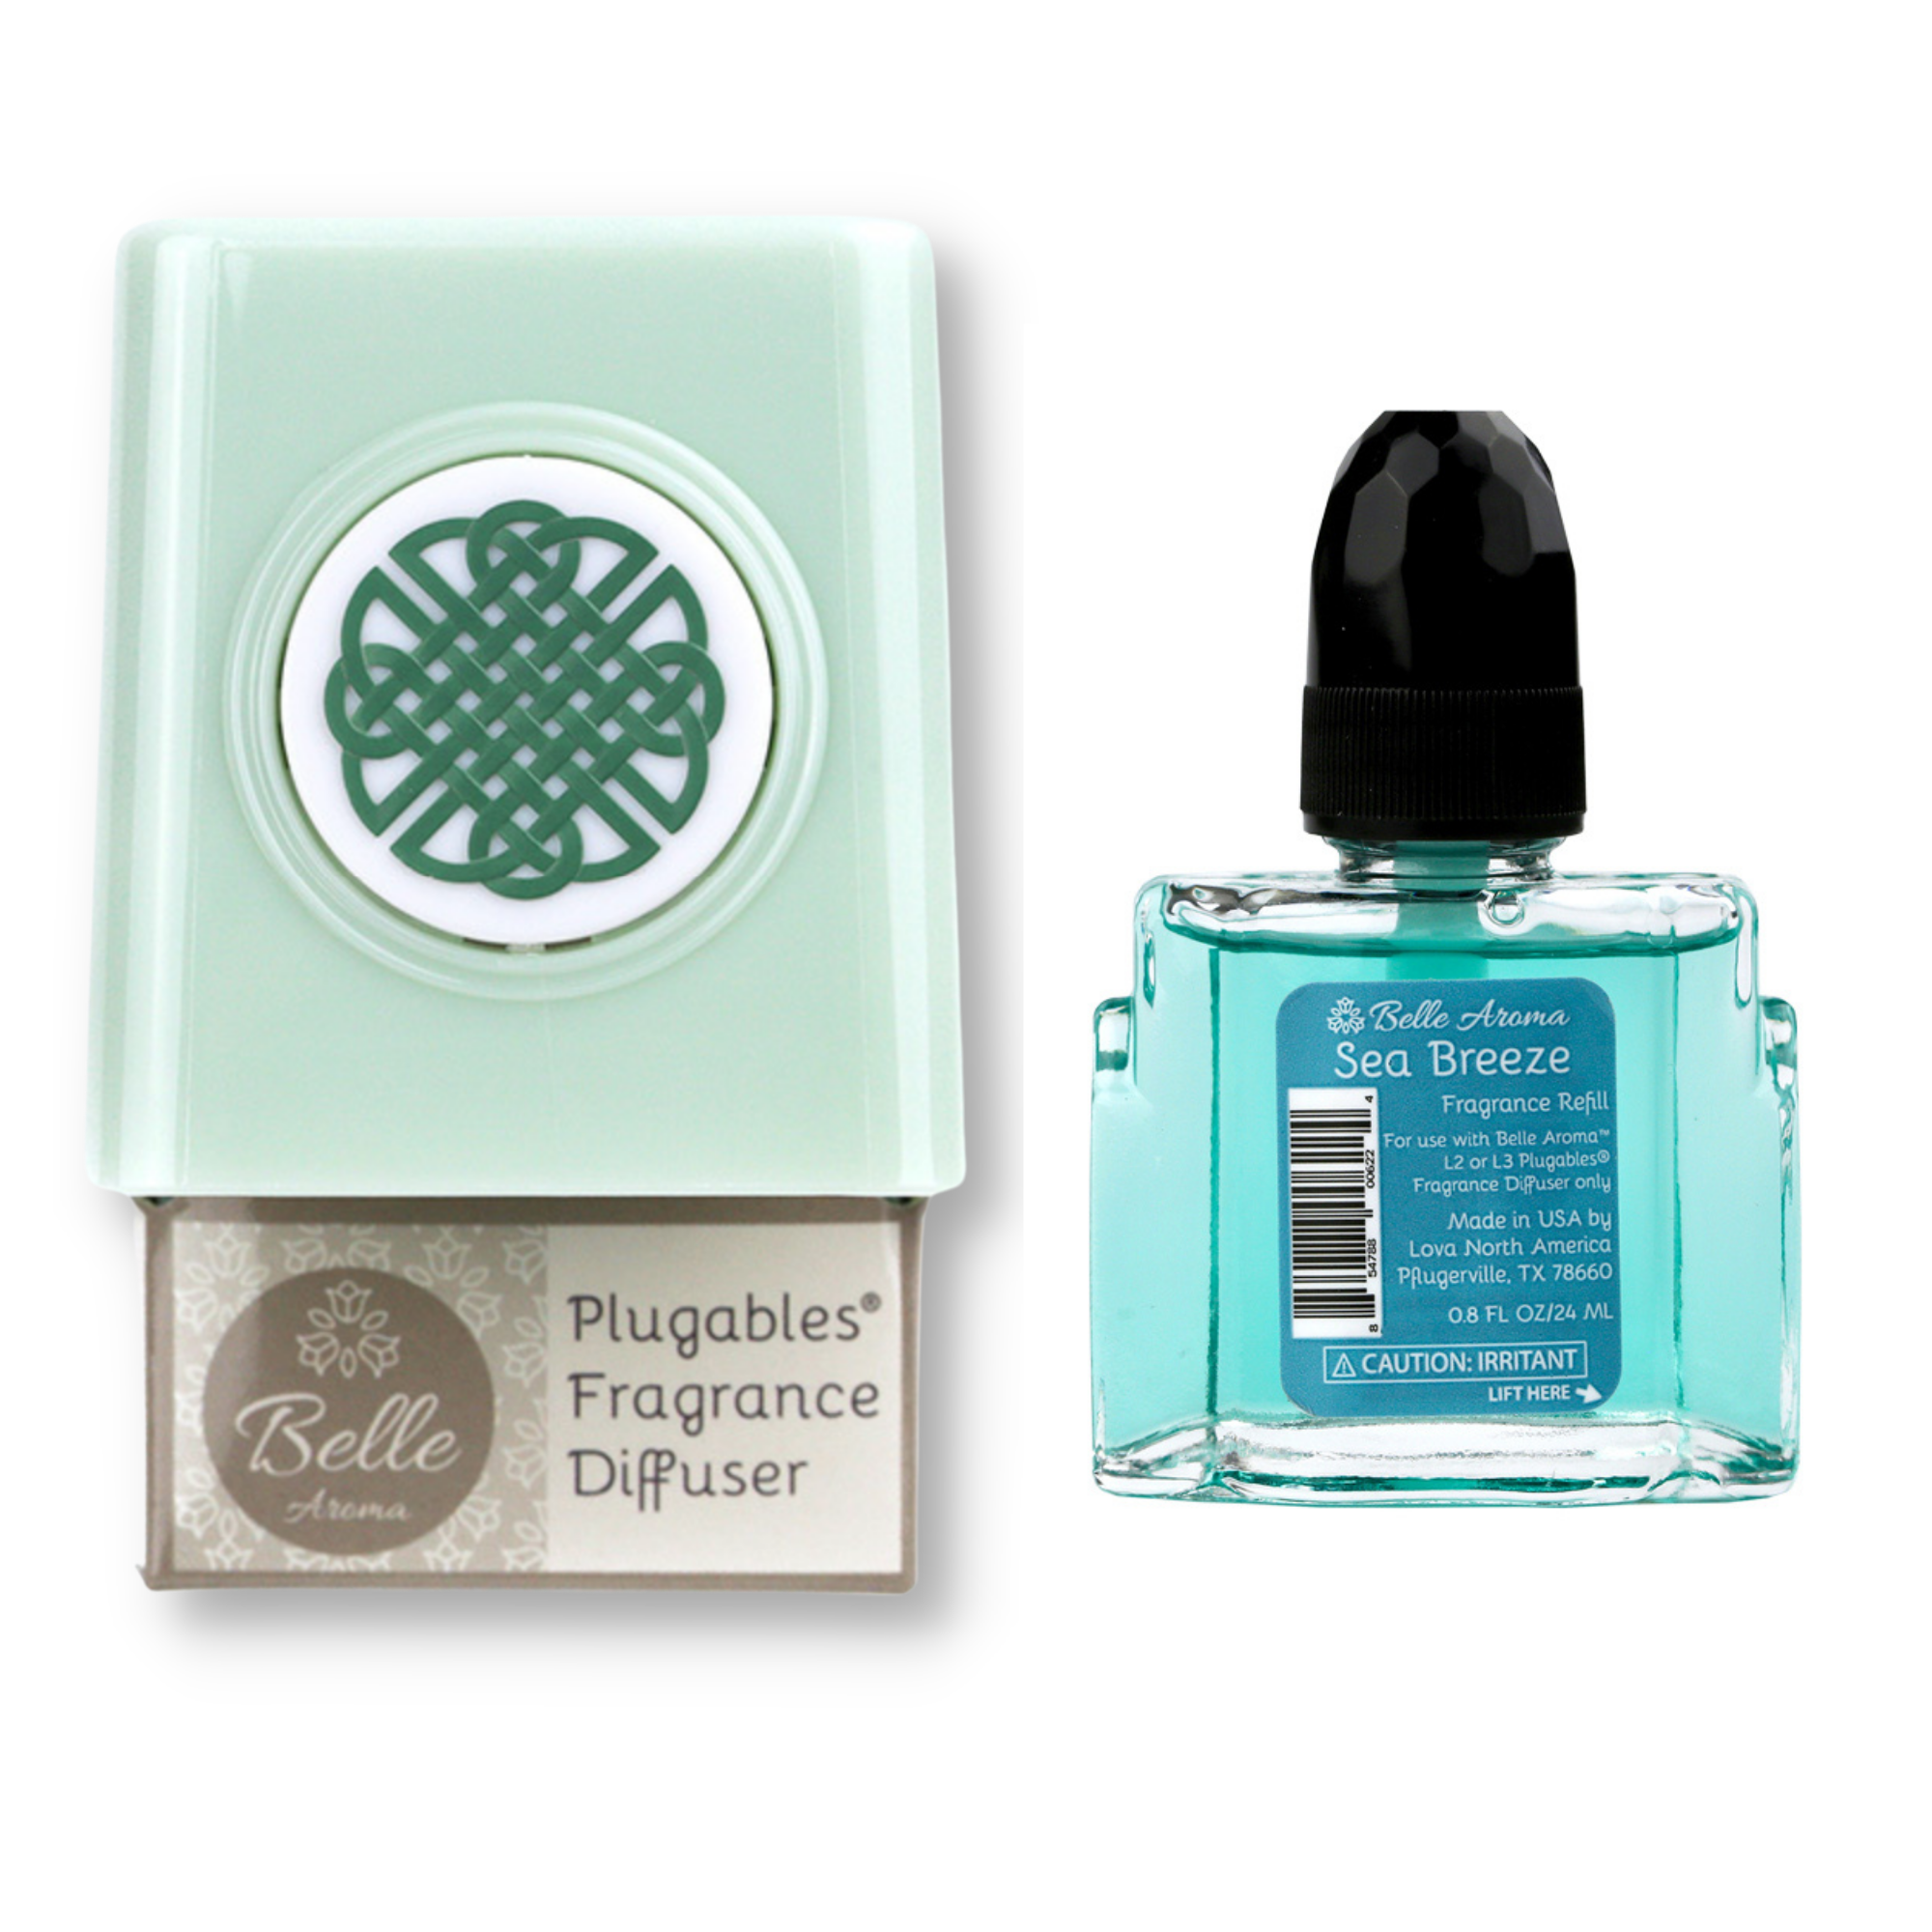 Celtic Knot Medallion Plugables® Plugin Electric Scented Oil Diffuser - Sea Glass with Sea Breeze Fragrance Oil Home Fragrance Accessories